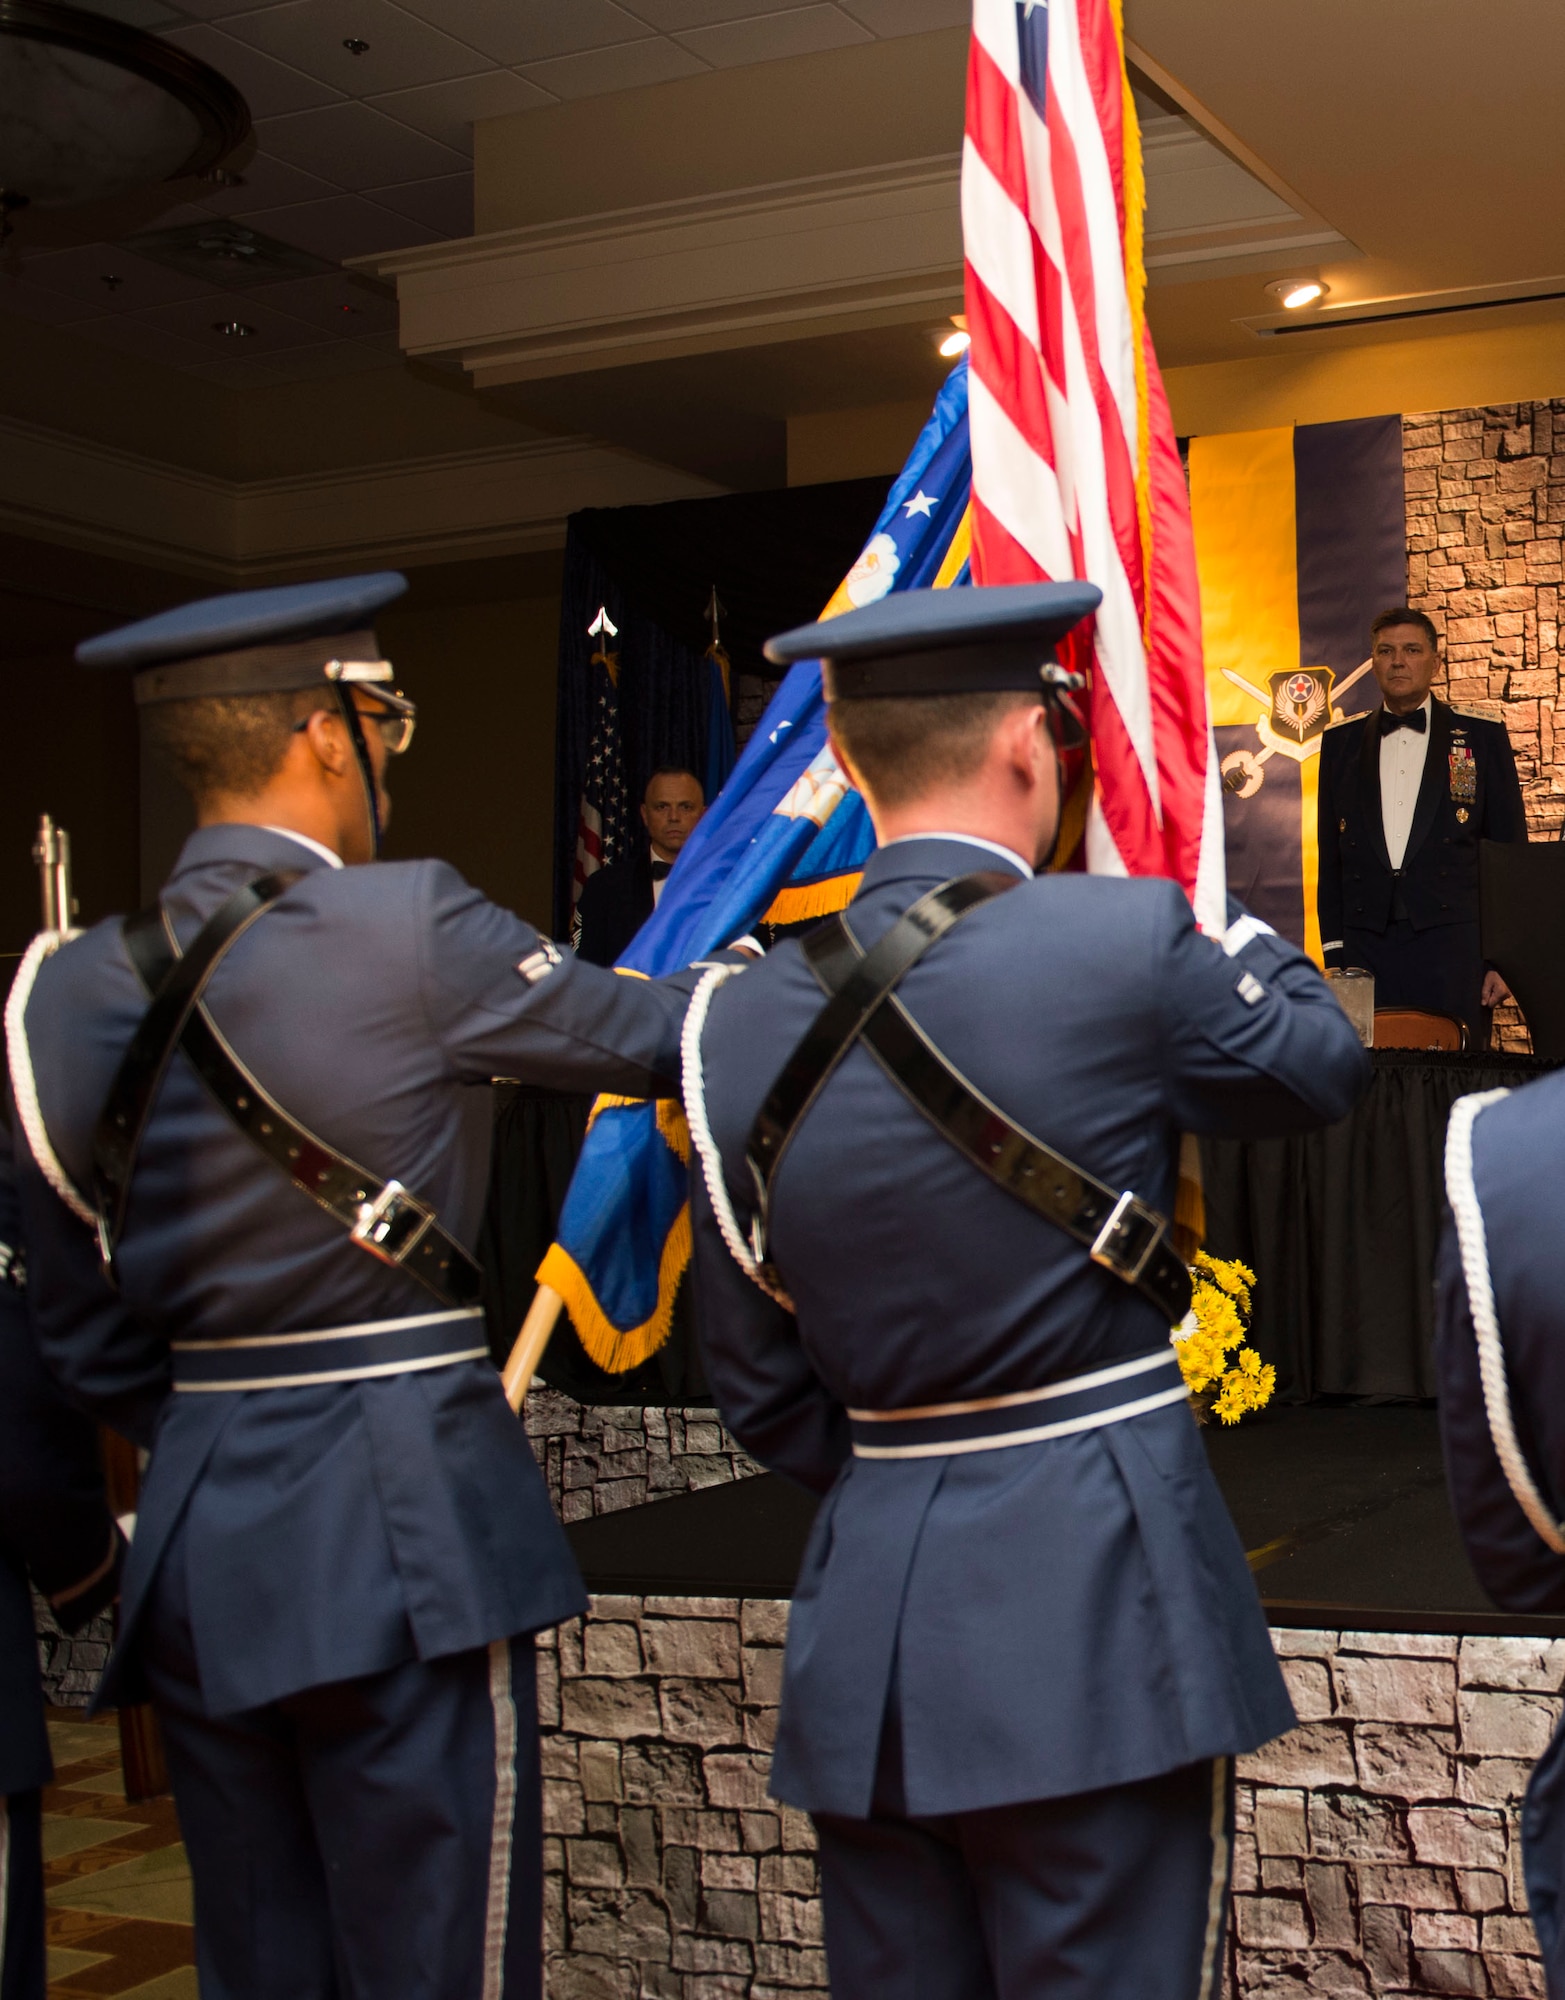 Hurlburt Field Honor Guard members post the colors durign the Order of the Sword ceremony at Hurlburt Field Fla., Nov. 18, 2016. The Order of the Sword is the highest and most prestigious award that can be given to an officer by enlisted military members. (U.S. Air Force photo by Senior Airman Krystal M. Garrett)